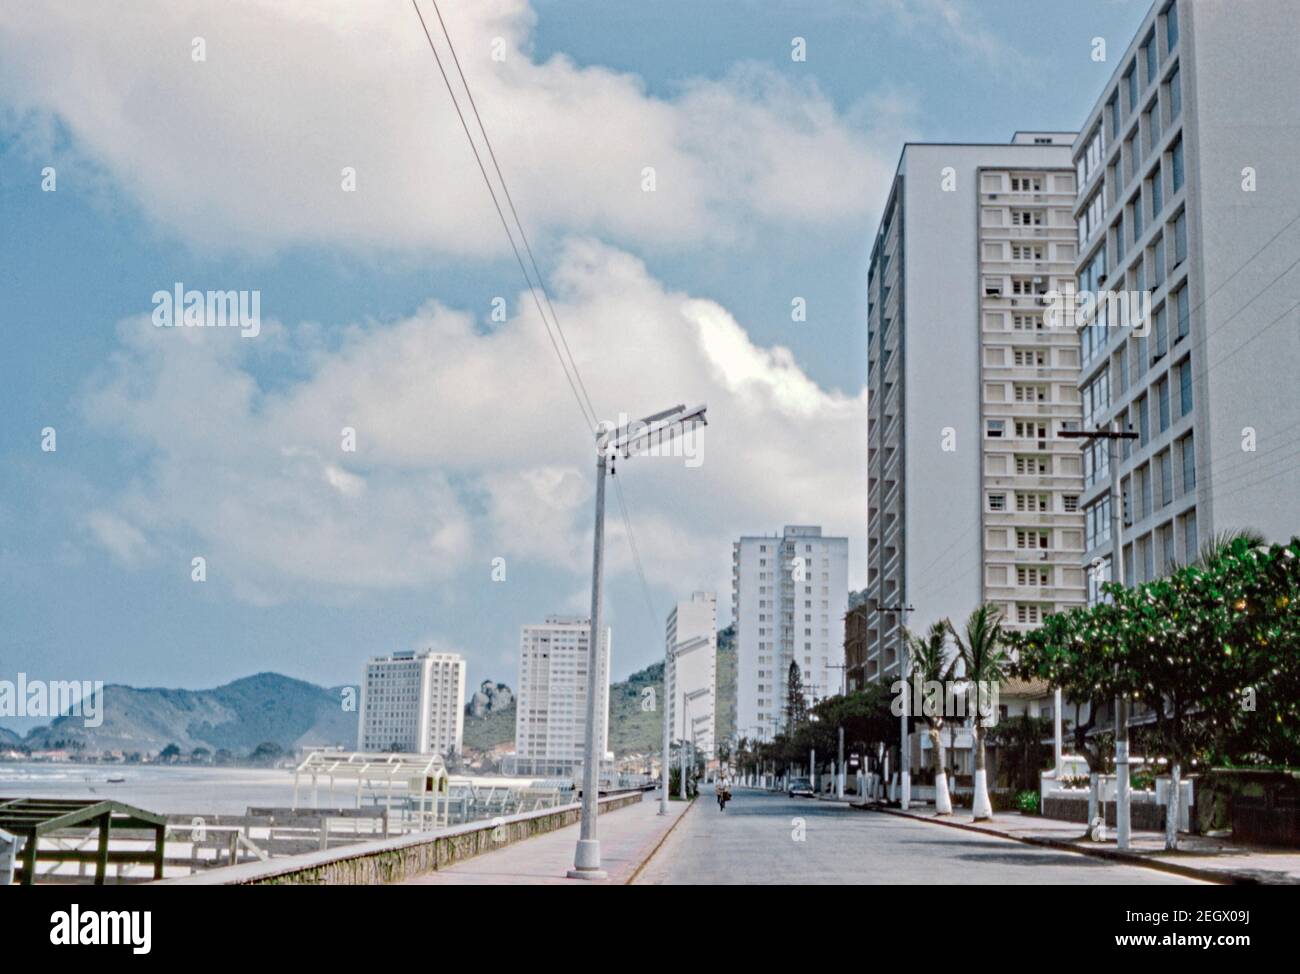 Looking west along the Avenida Marechal Deodora da Fonseca at Guarujá, São Paulo, Brazil 1961. High-rise apartment blocks start to dominate the beach-front scene even in the early 1960s. Guarujá is located in Santo Amaro island and is a city in the São Paulo state. This place name comes from the Tupi language, and means ‘narrow path’. This image is from an old amateur 35mm colour transparency. Stock Photo